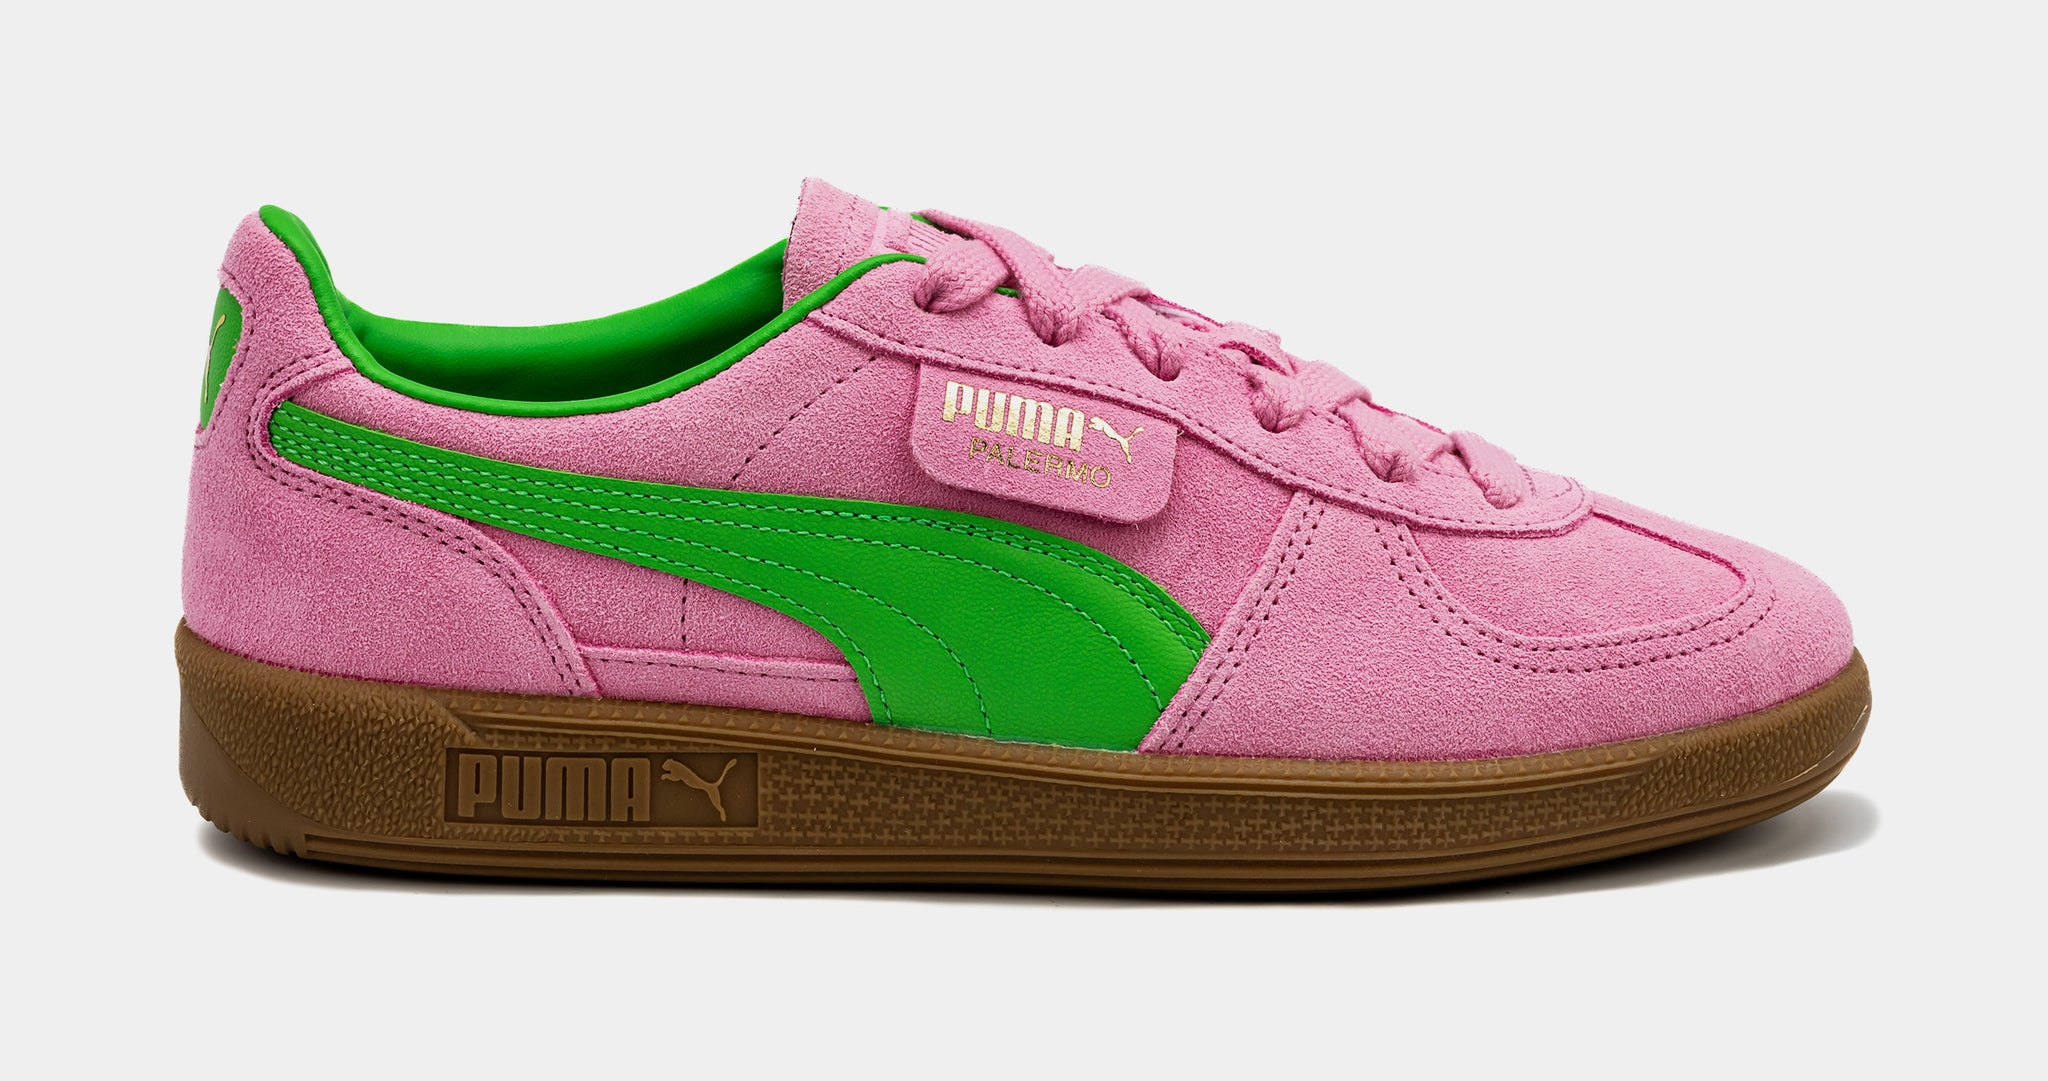 PUMA Palace Shoes Lifestyle Shoe Pink Special 397858 01 Green Womens Palermo –